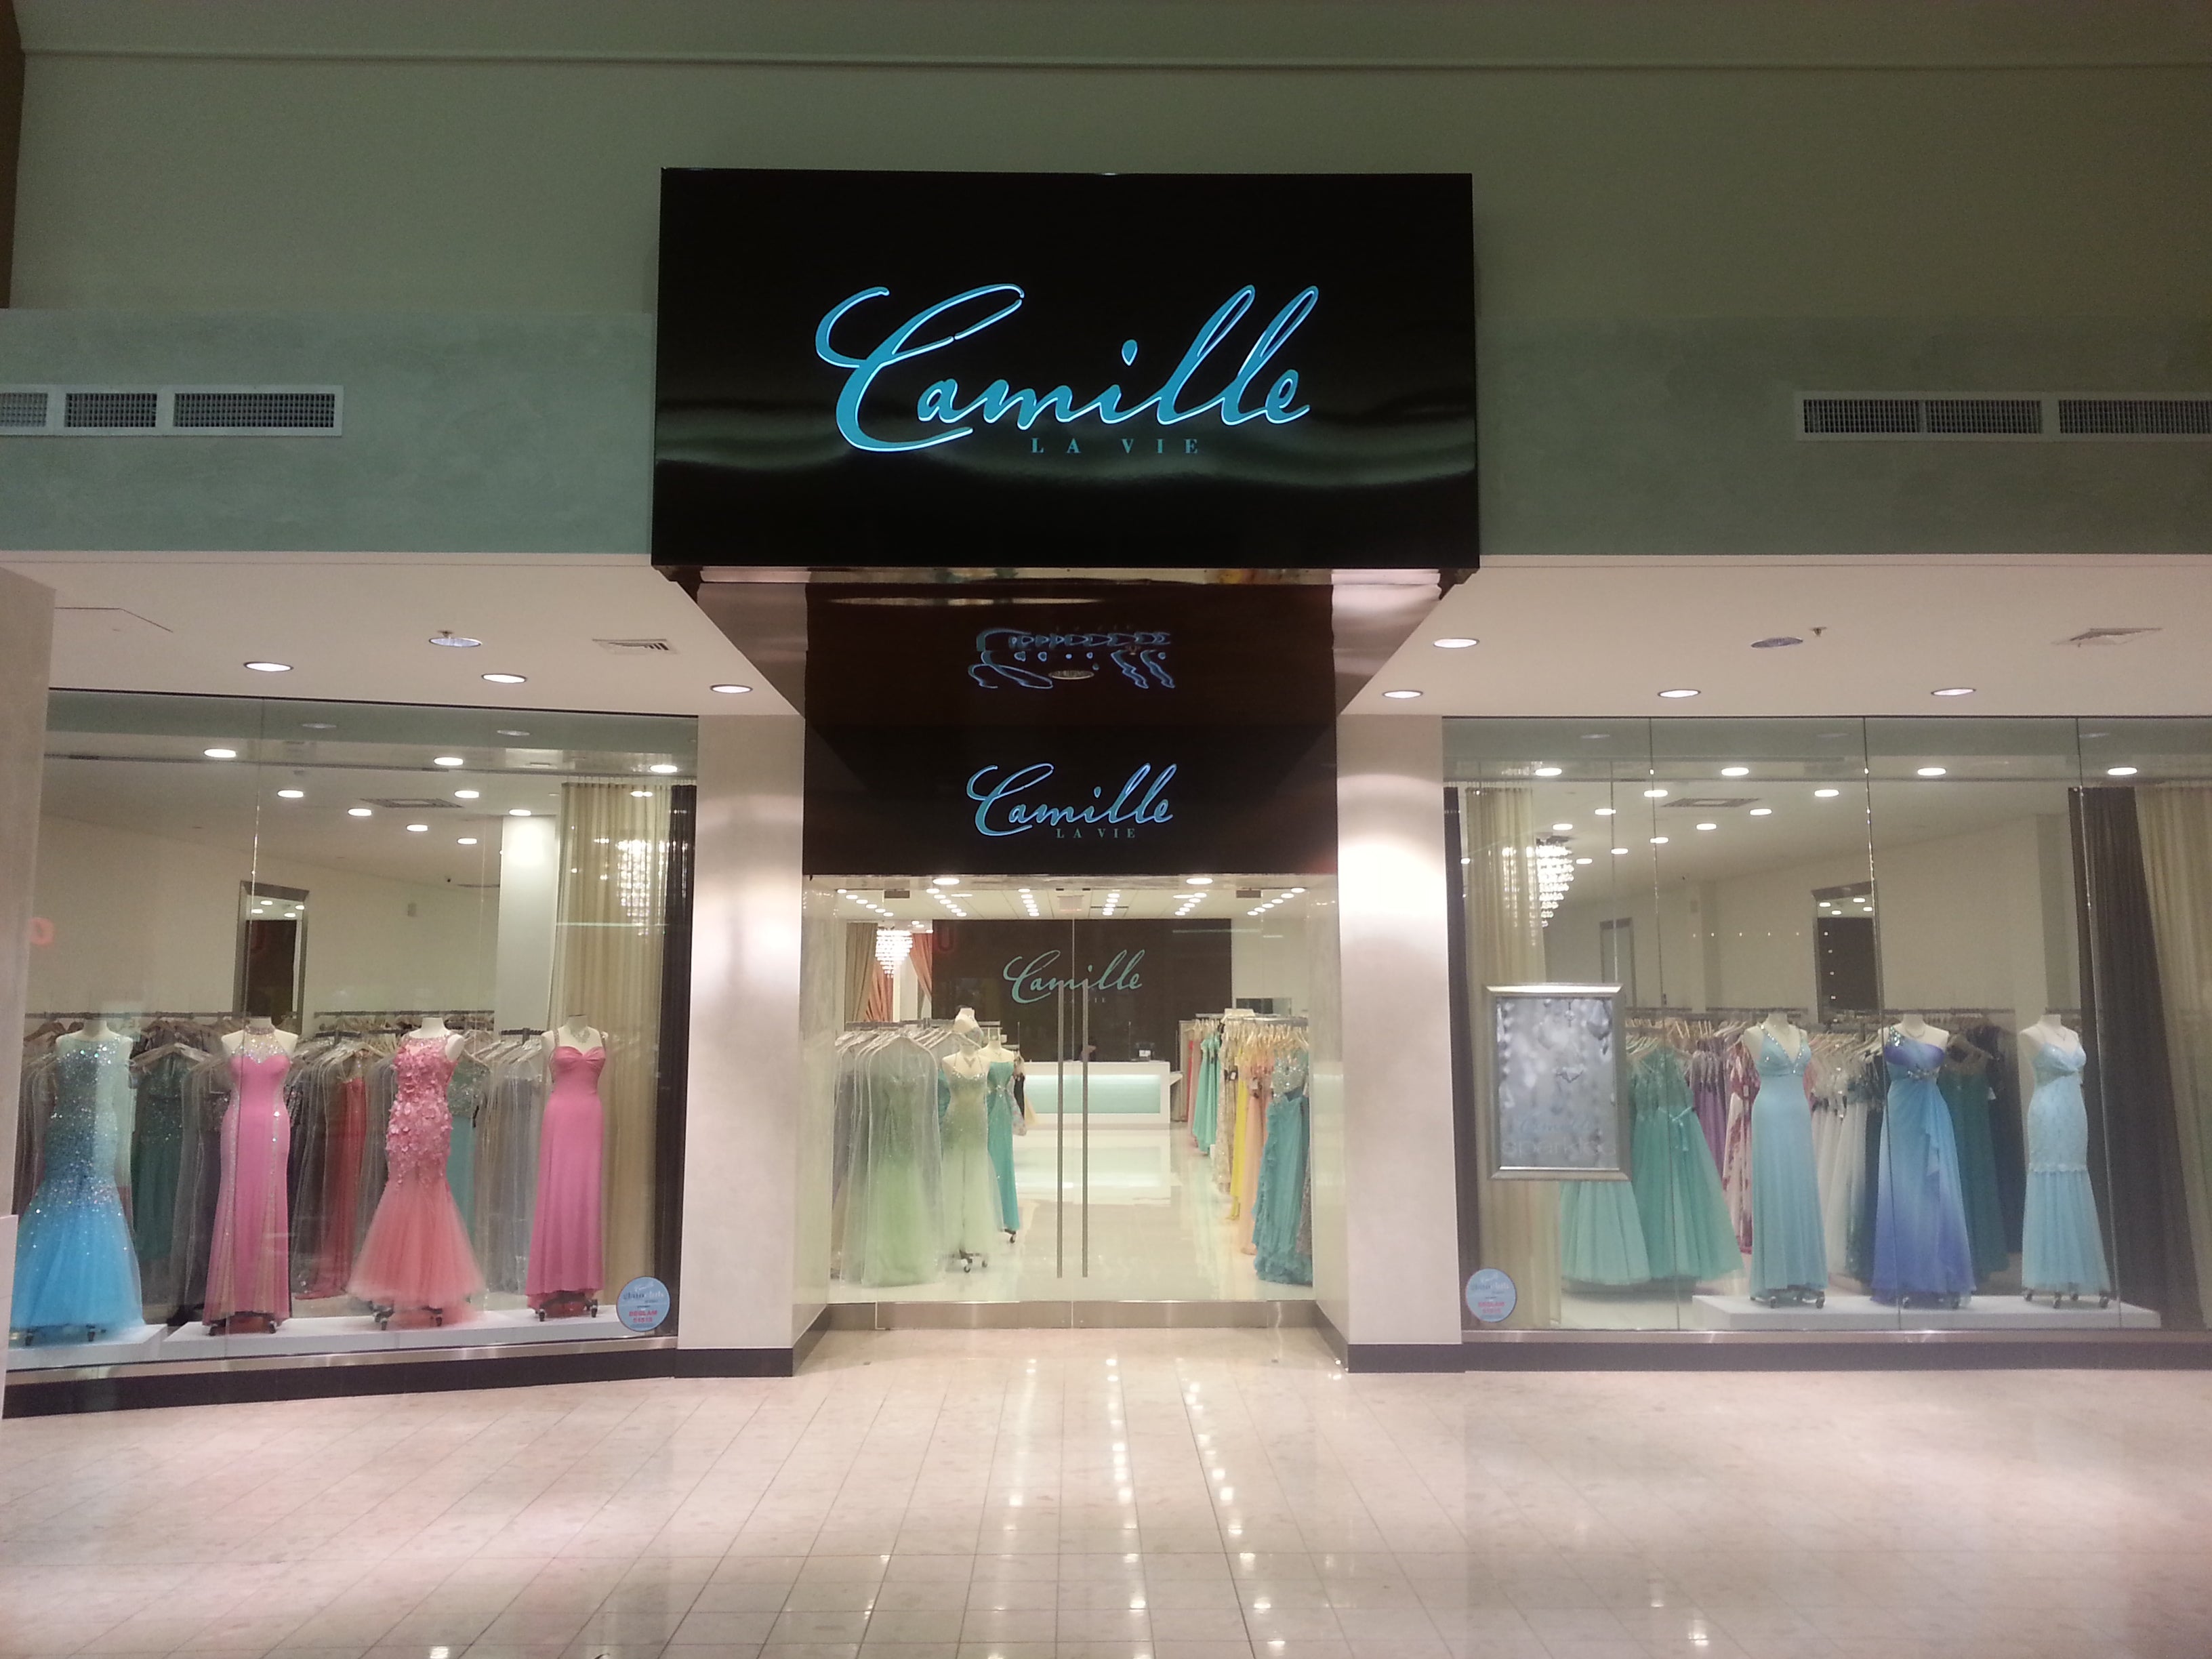 Shop dresses for Prom, Homecoming, Evening and more at Camille La Vie in Pembroke Pines